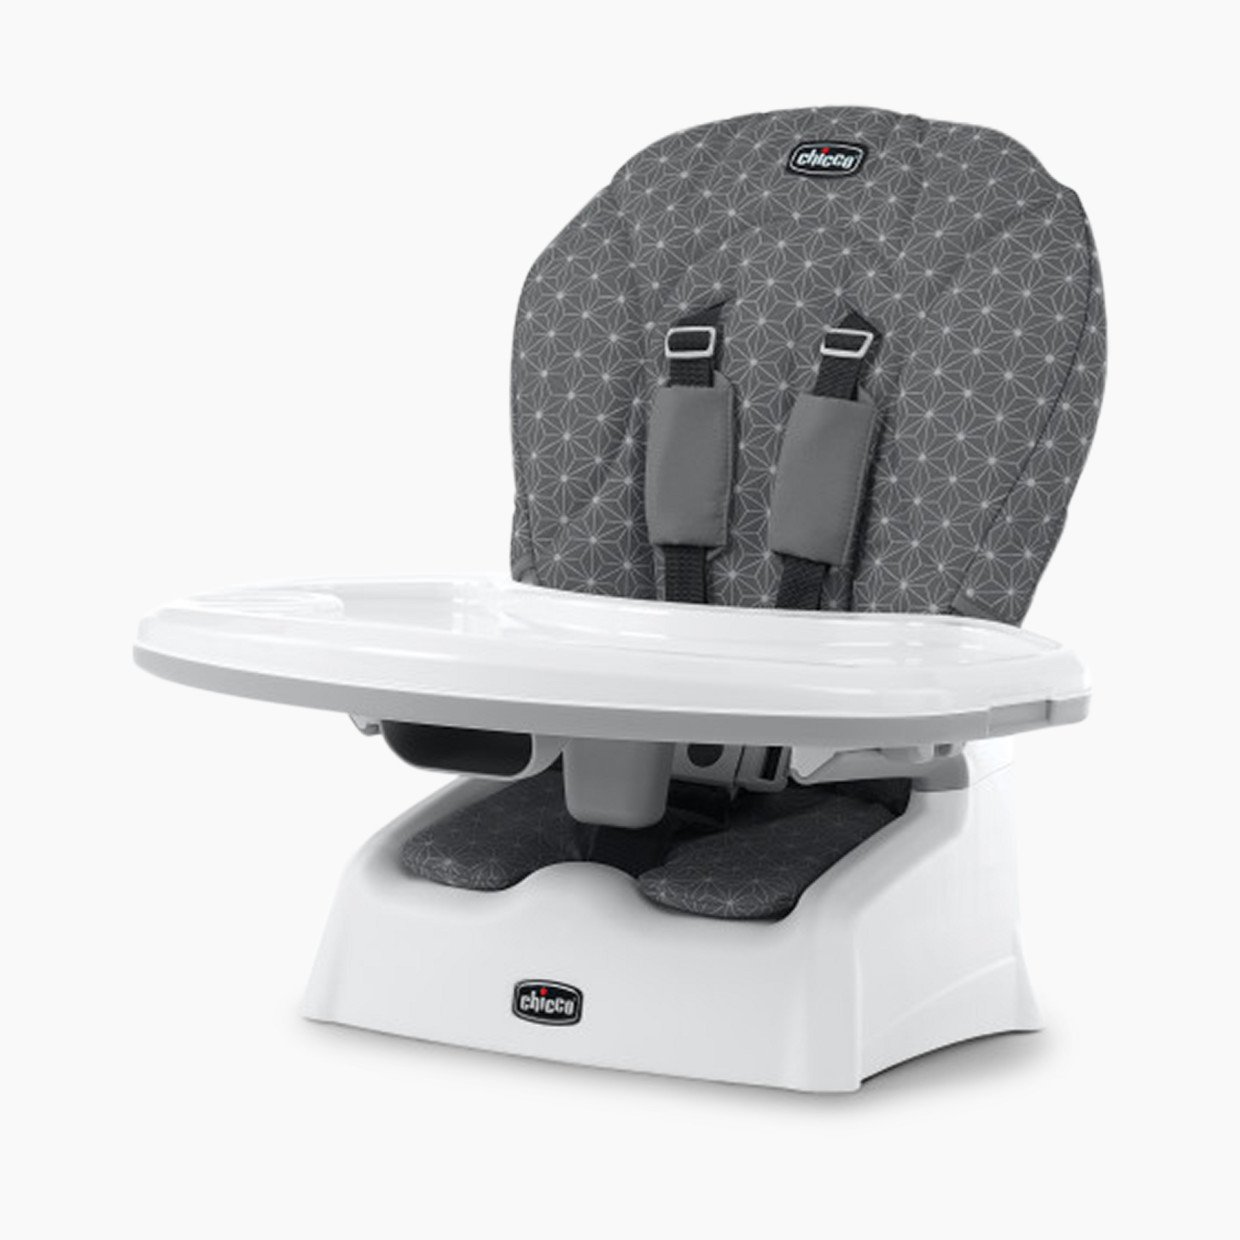 Chicco Snack Booster Seat - Grey Star.